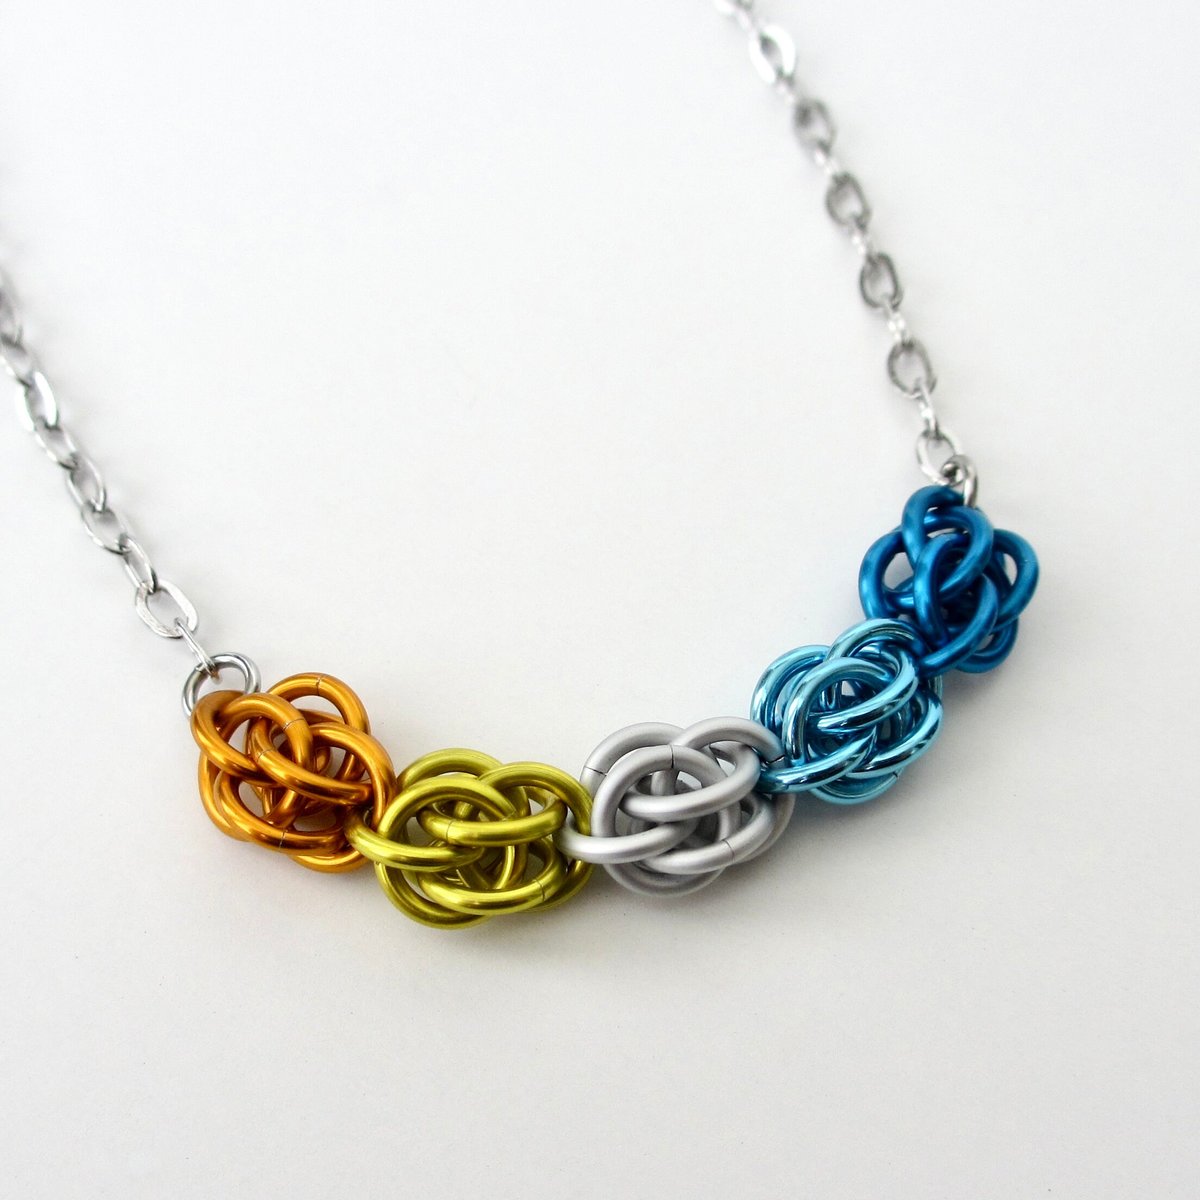 Aroace pride necklace, chainmail jewelry, Sweetpea weave - orange, yellow, white, light blue, blue